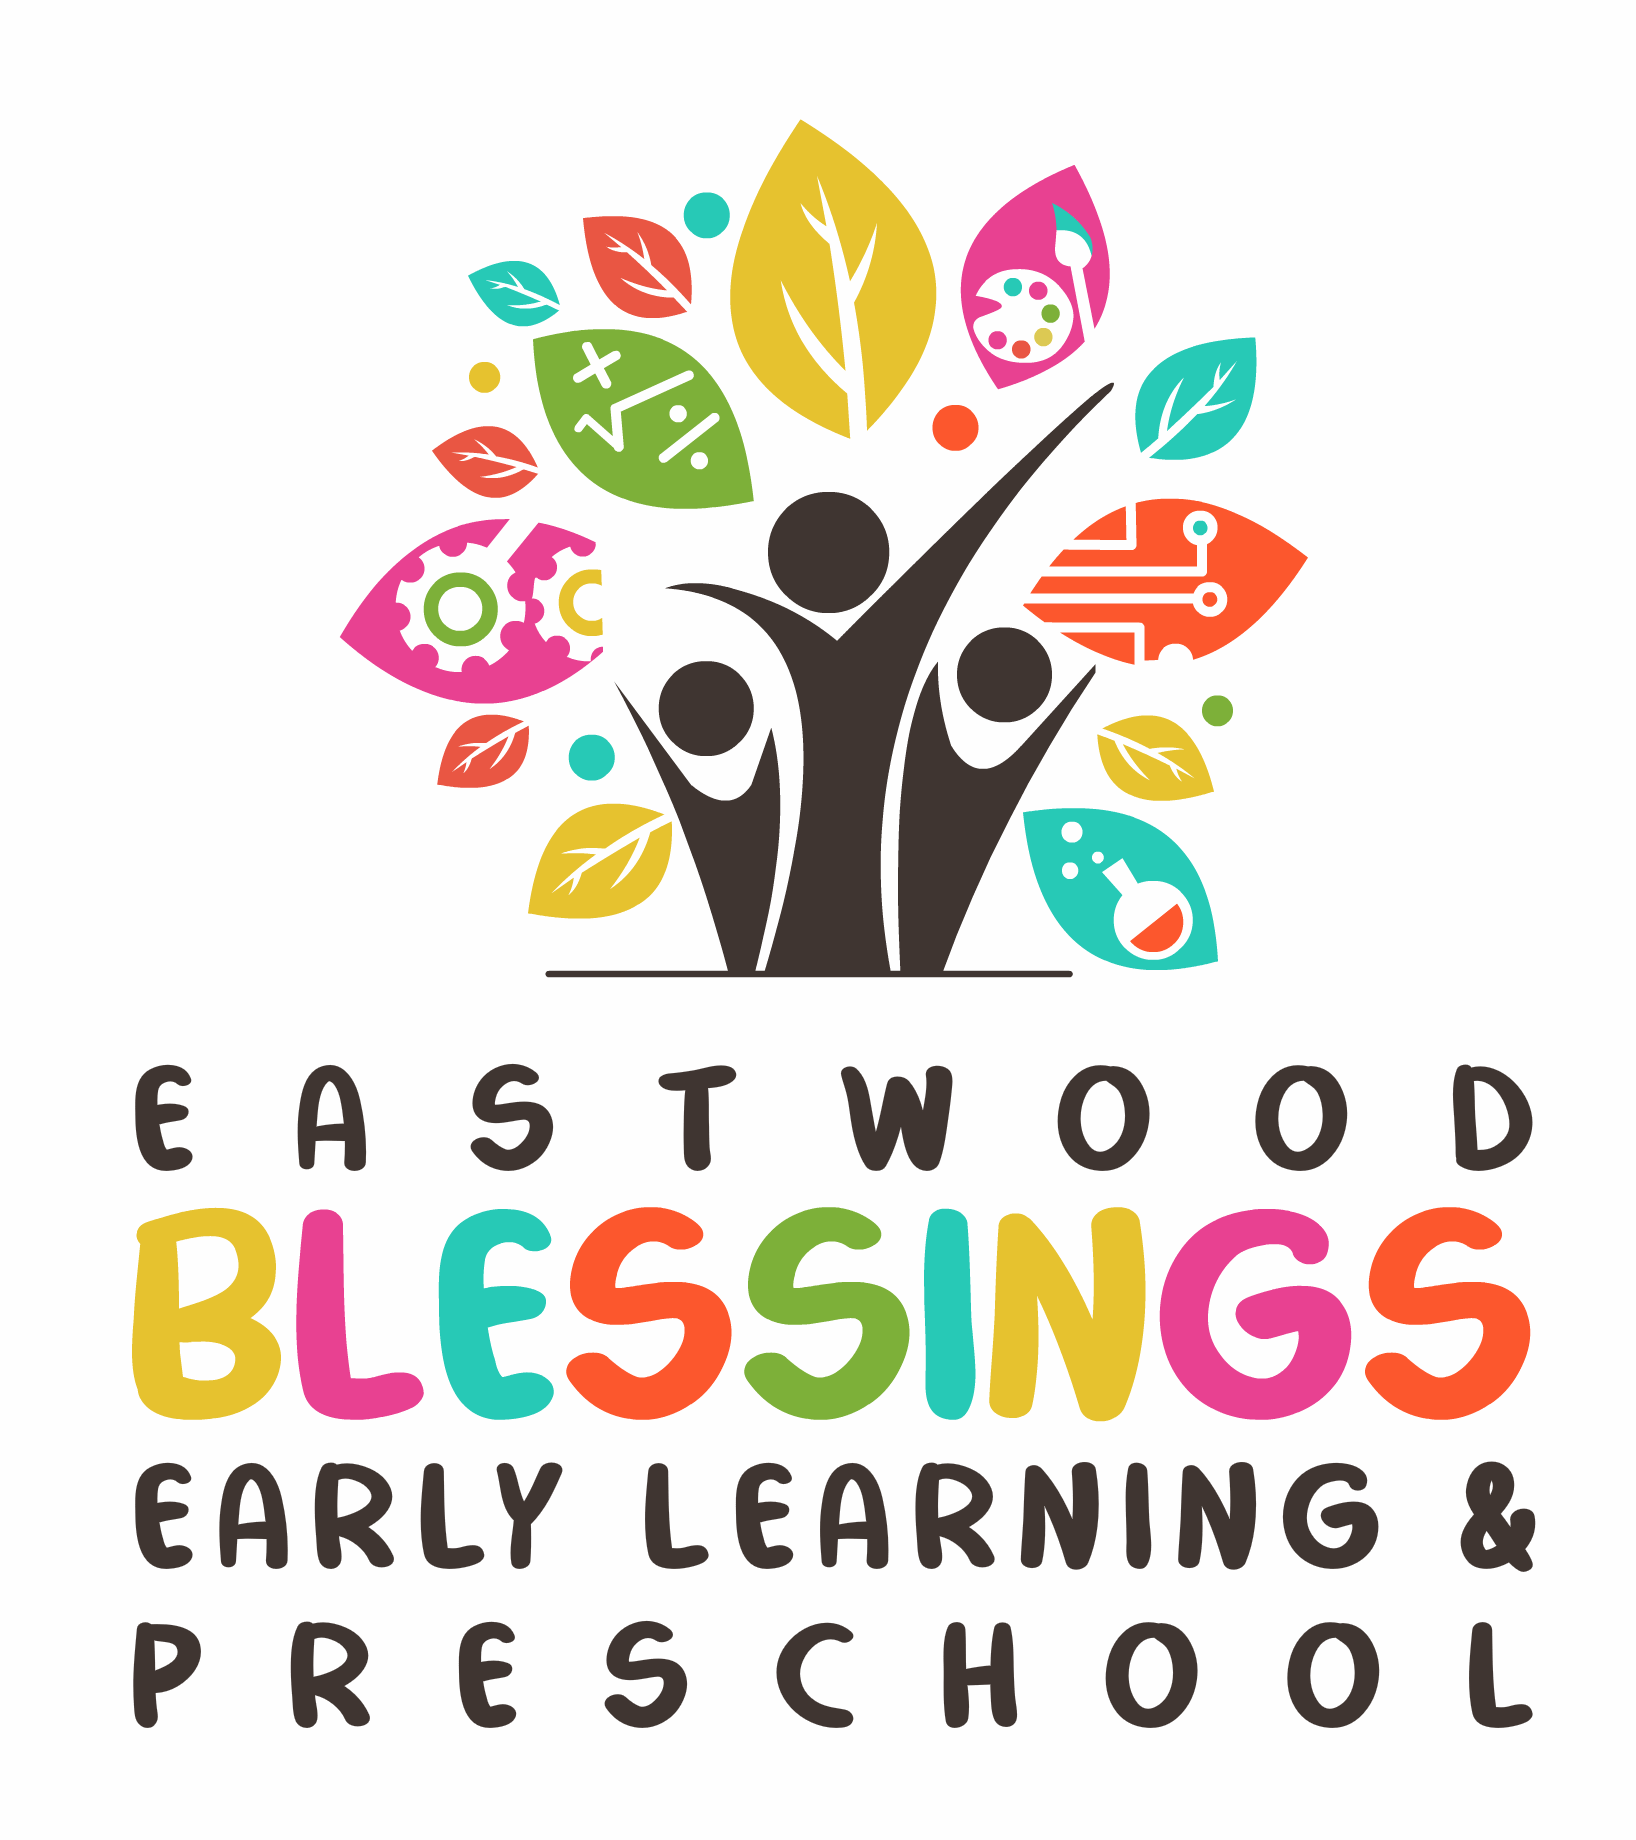 Eastwood Blessings Early Learning Centre